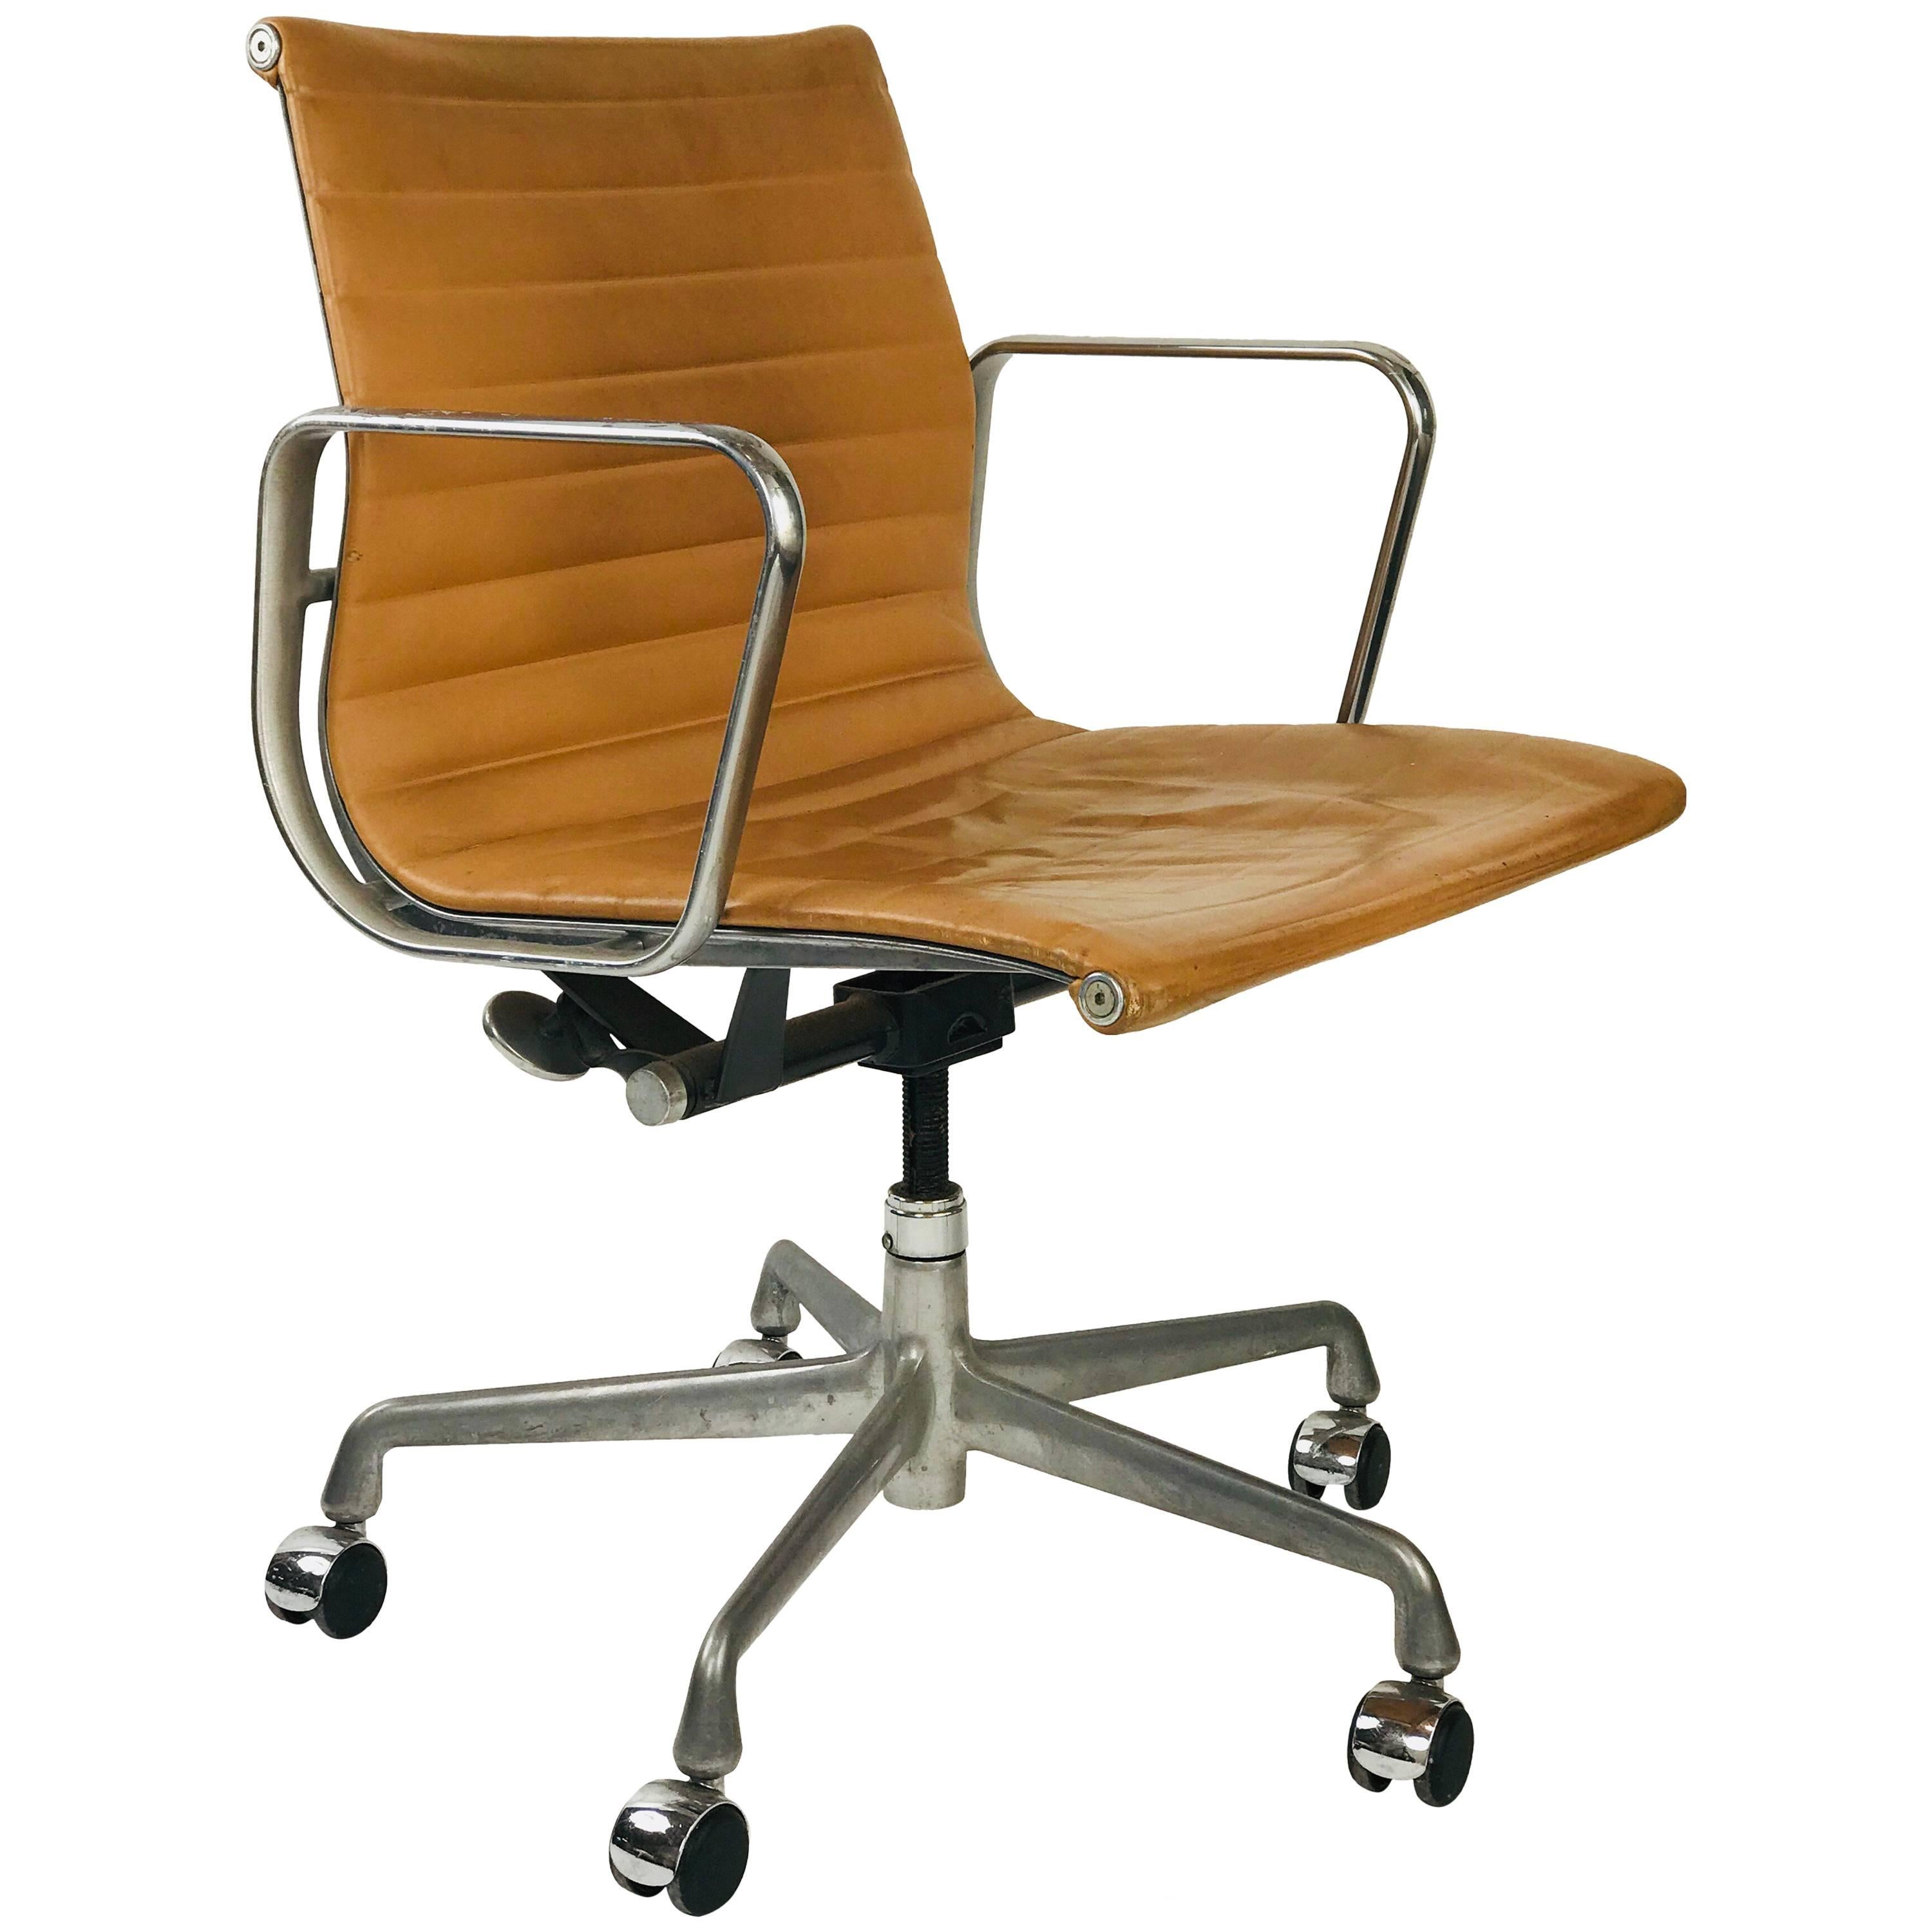 Eames Management Office Chair for Herman Miller Camel leather